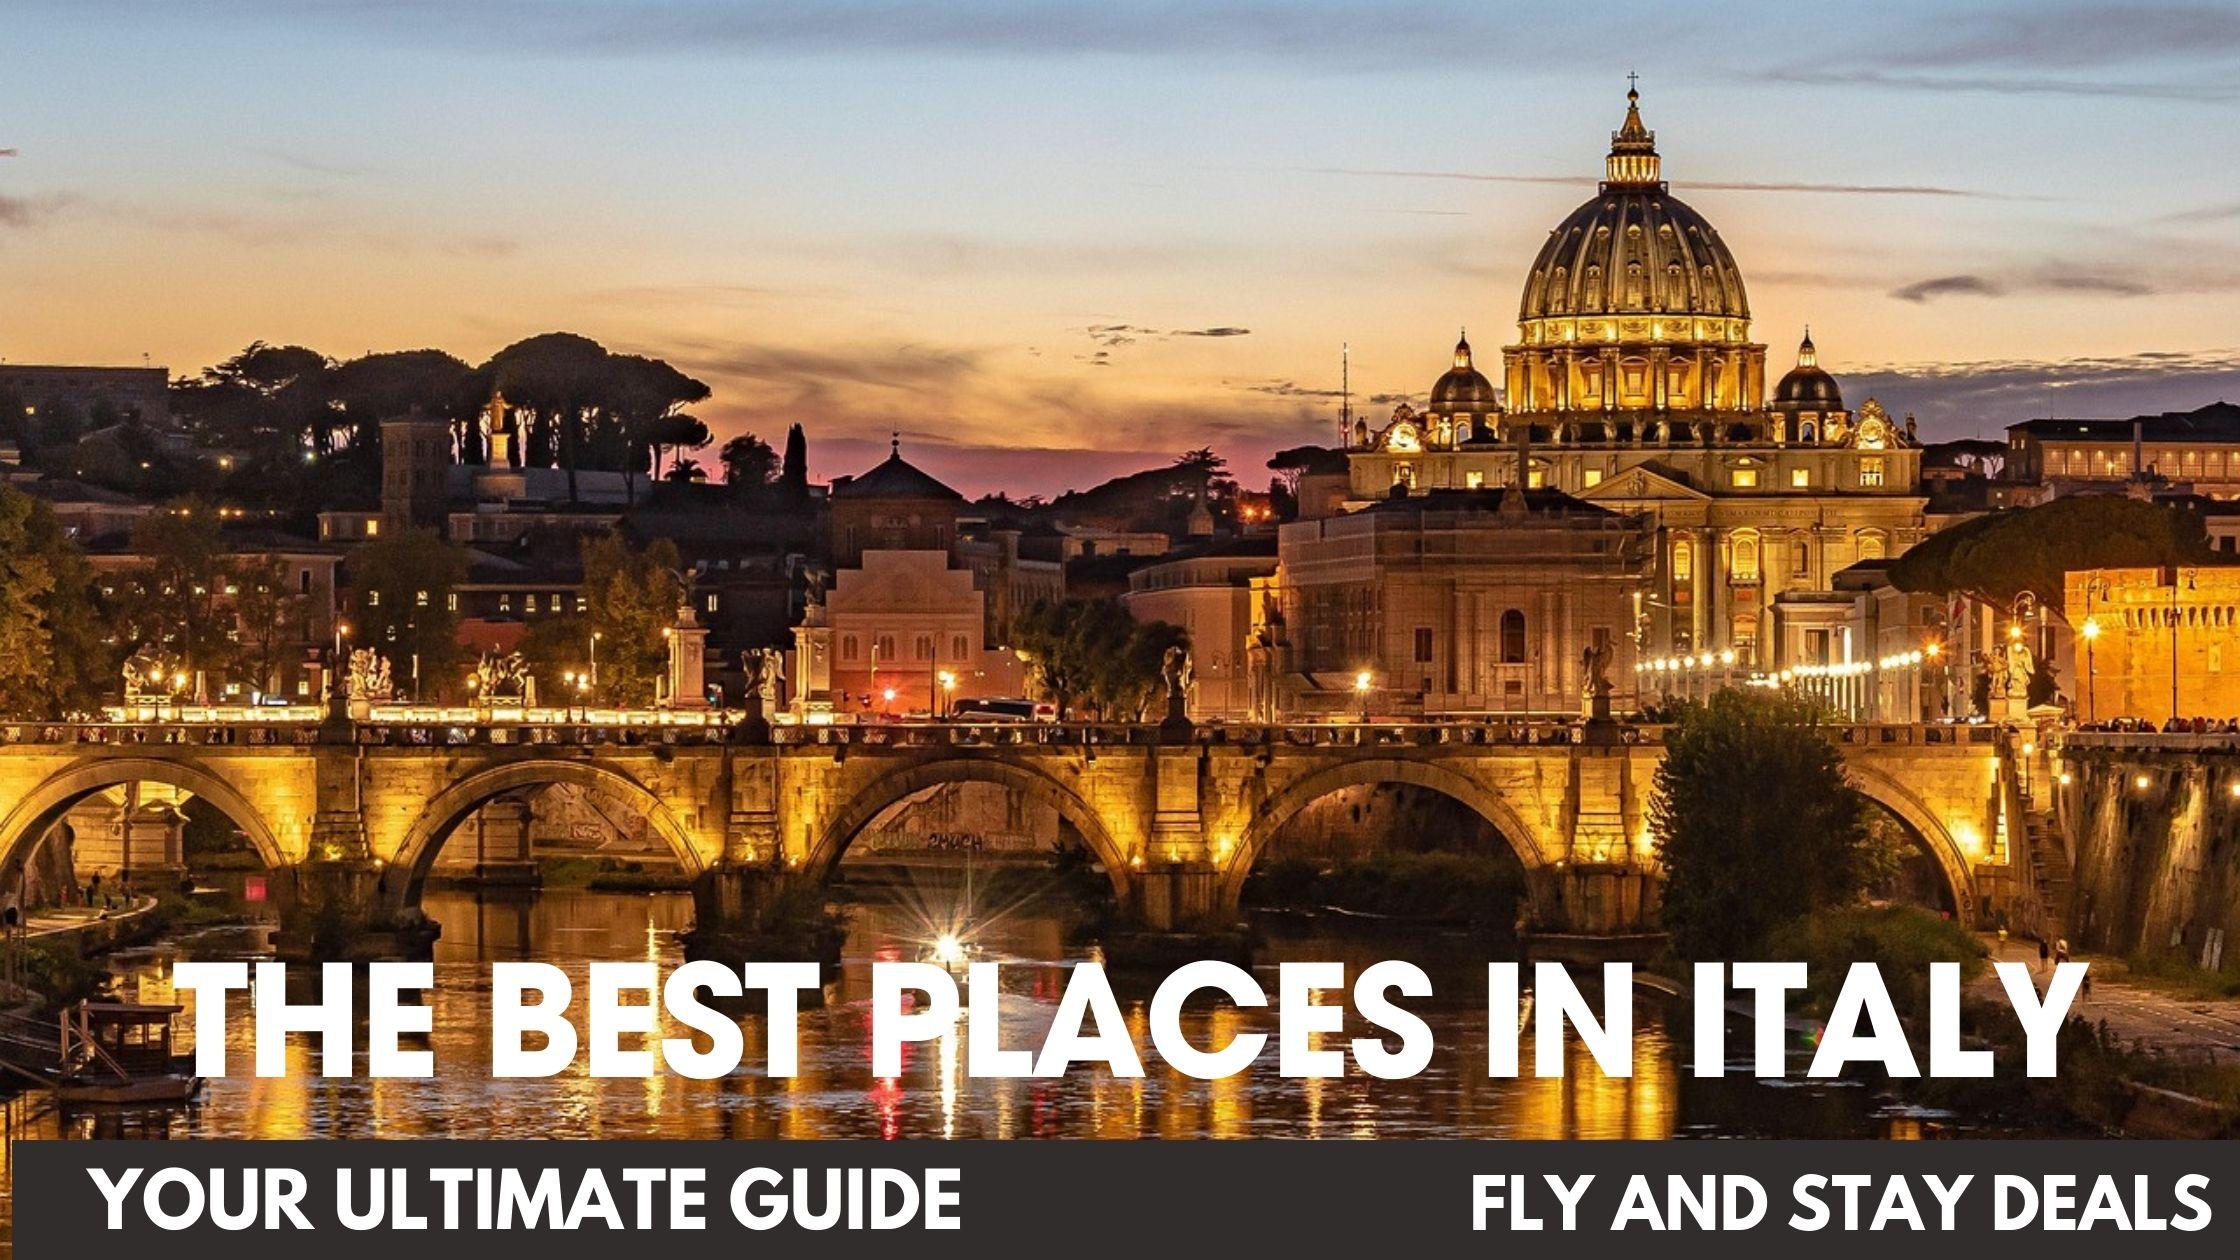 The Best places Italy